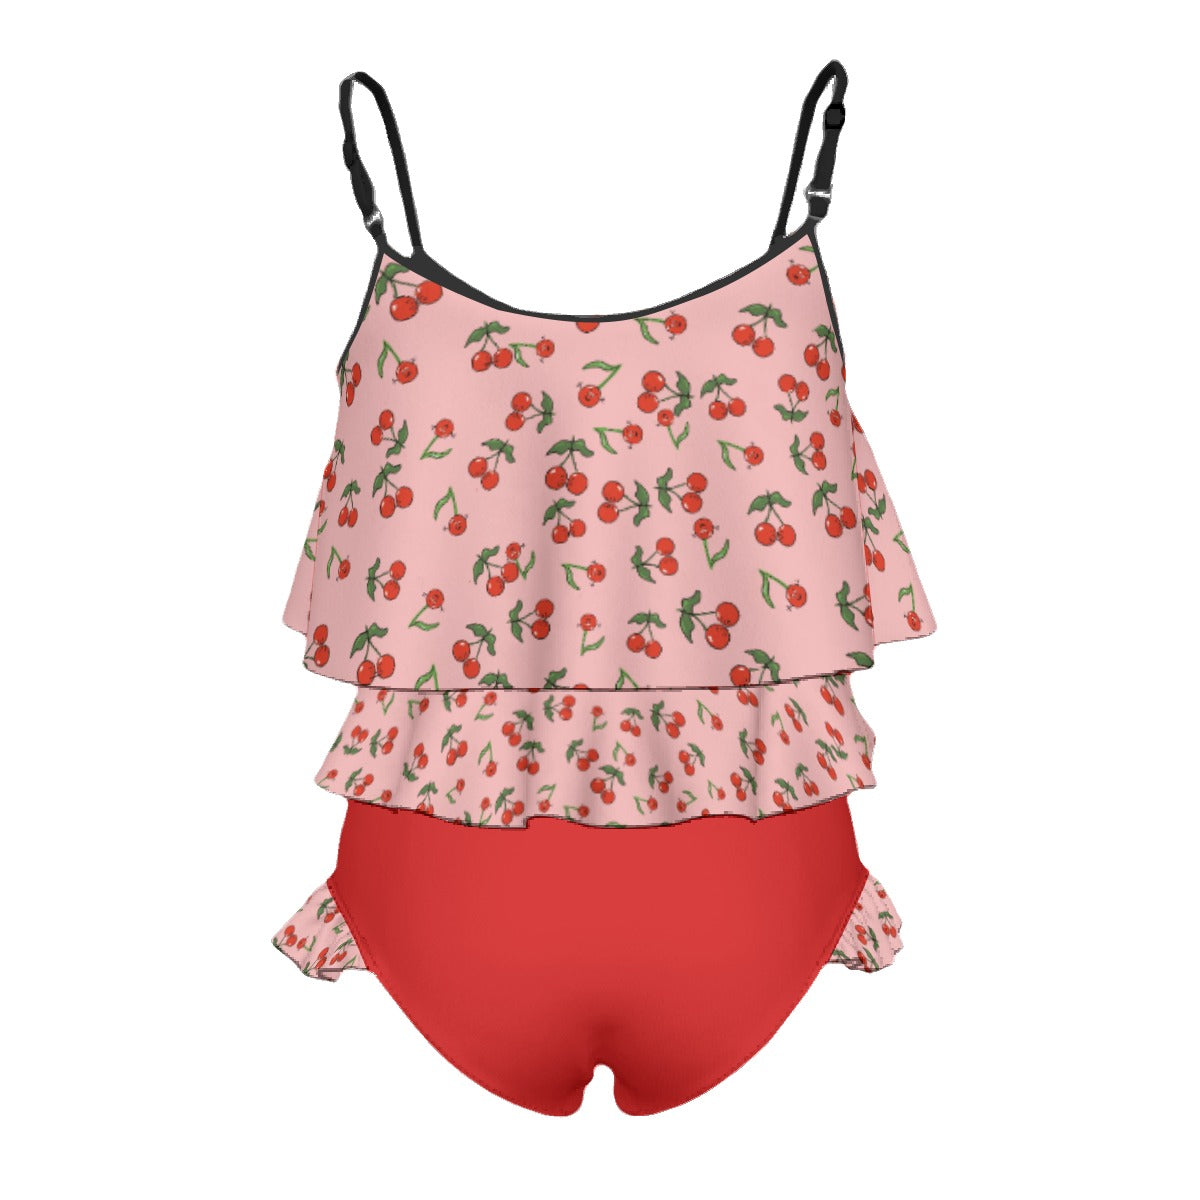 Youth Tankini Cherries with Solid Red Bottoms